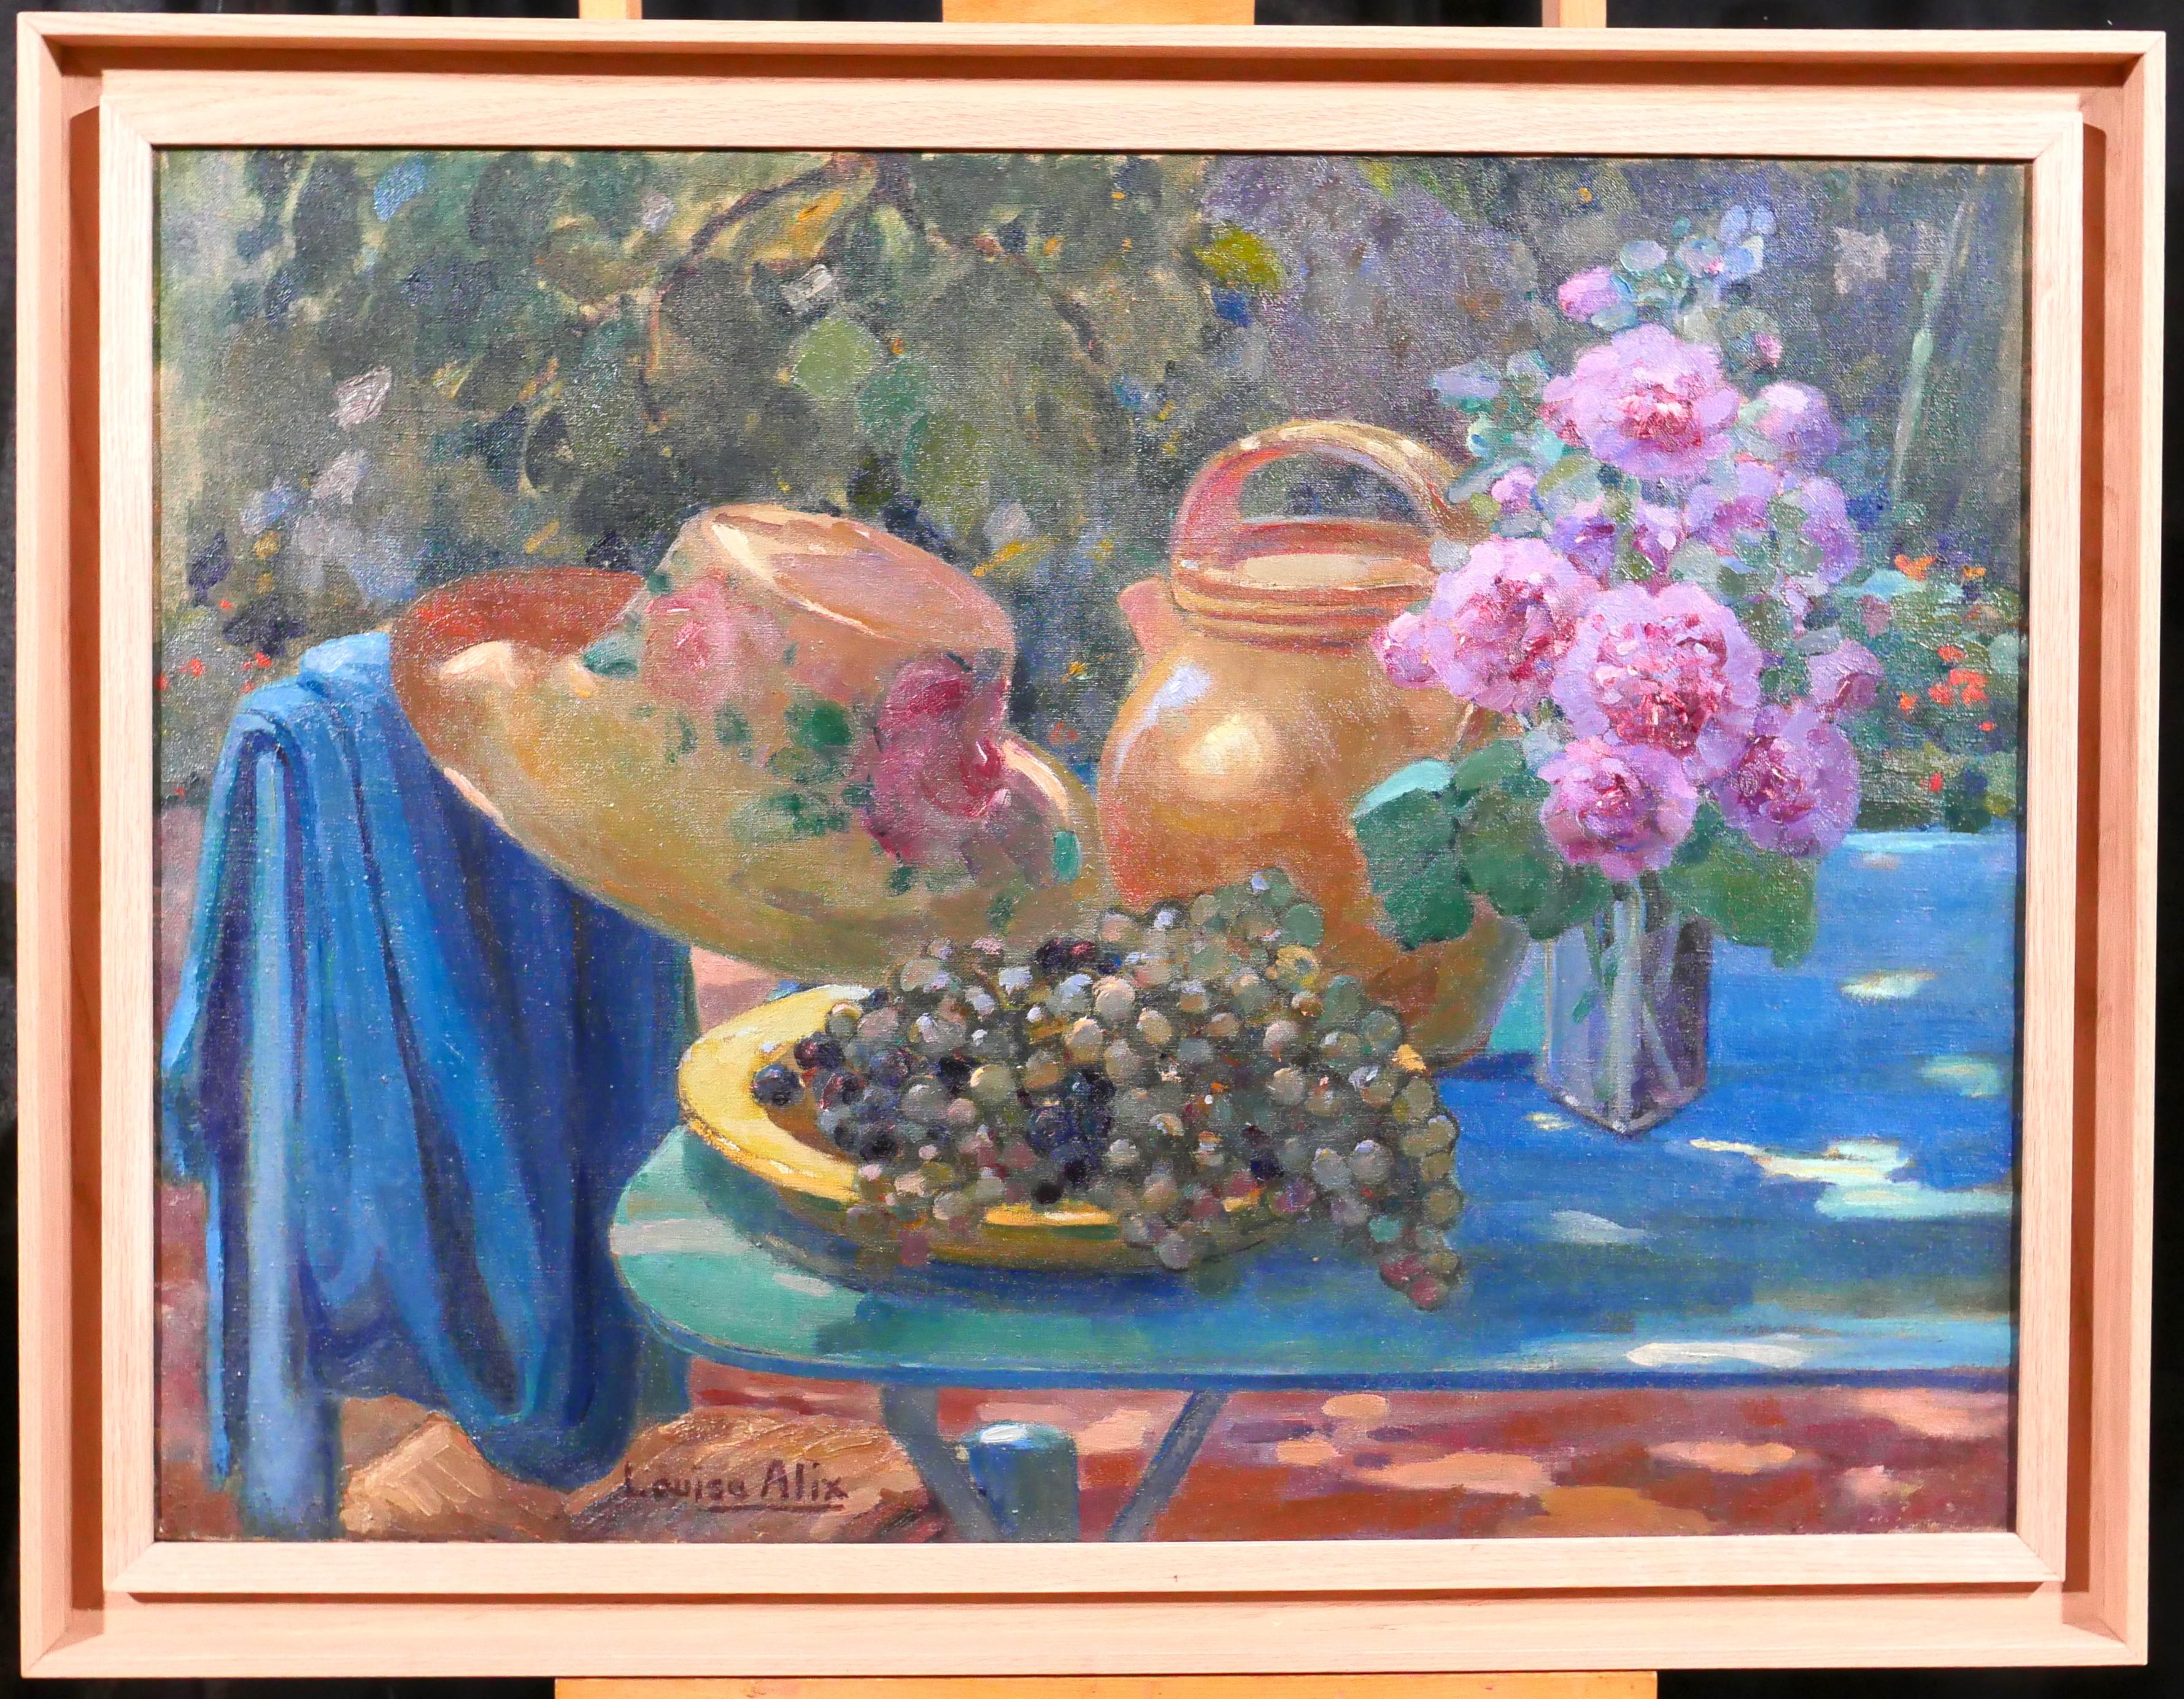 Still life in the garden: flowers, grapes and hat - Painting by Louise Alix